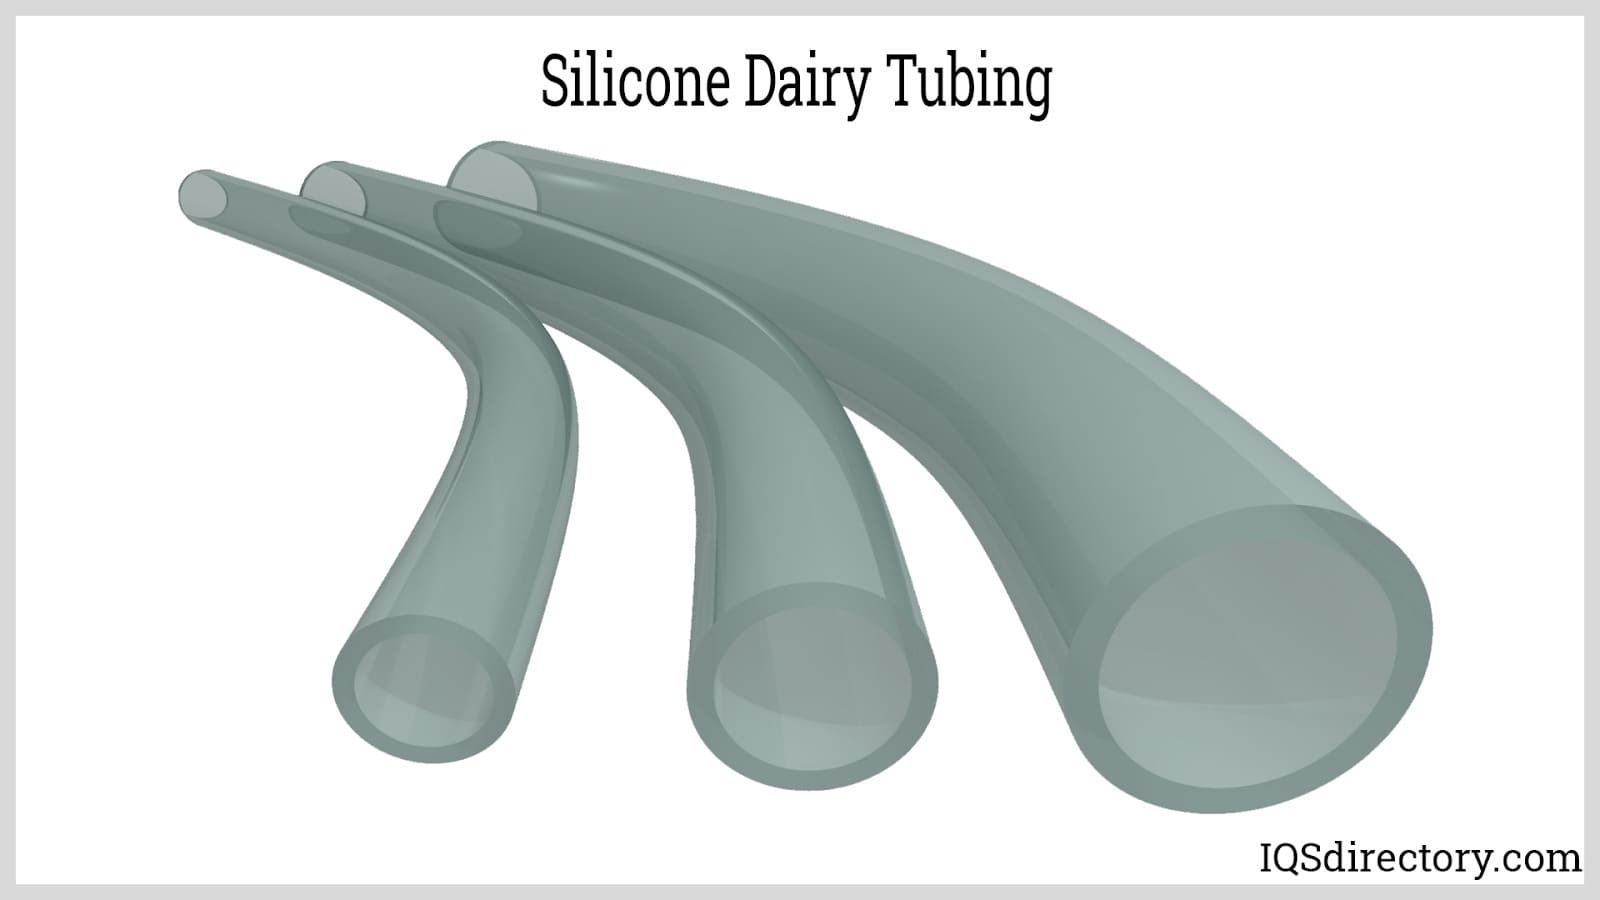 Silicone Dairy Tubing